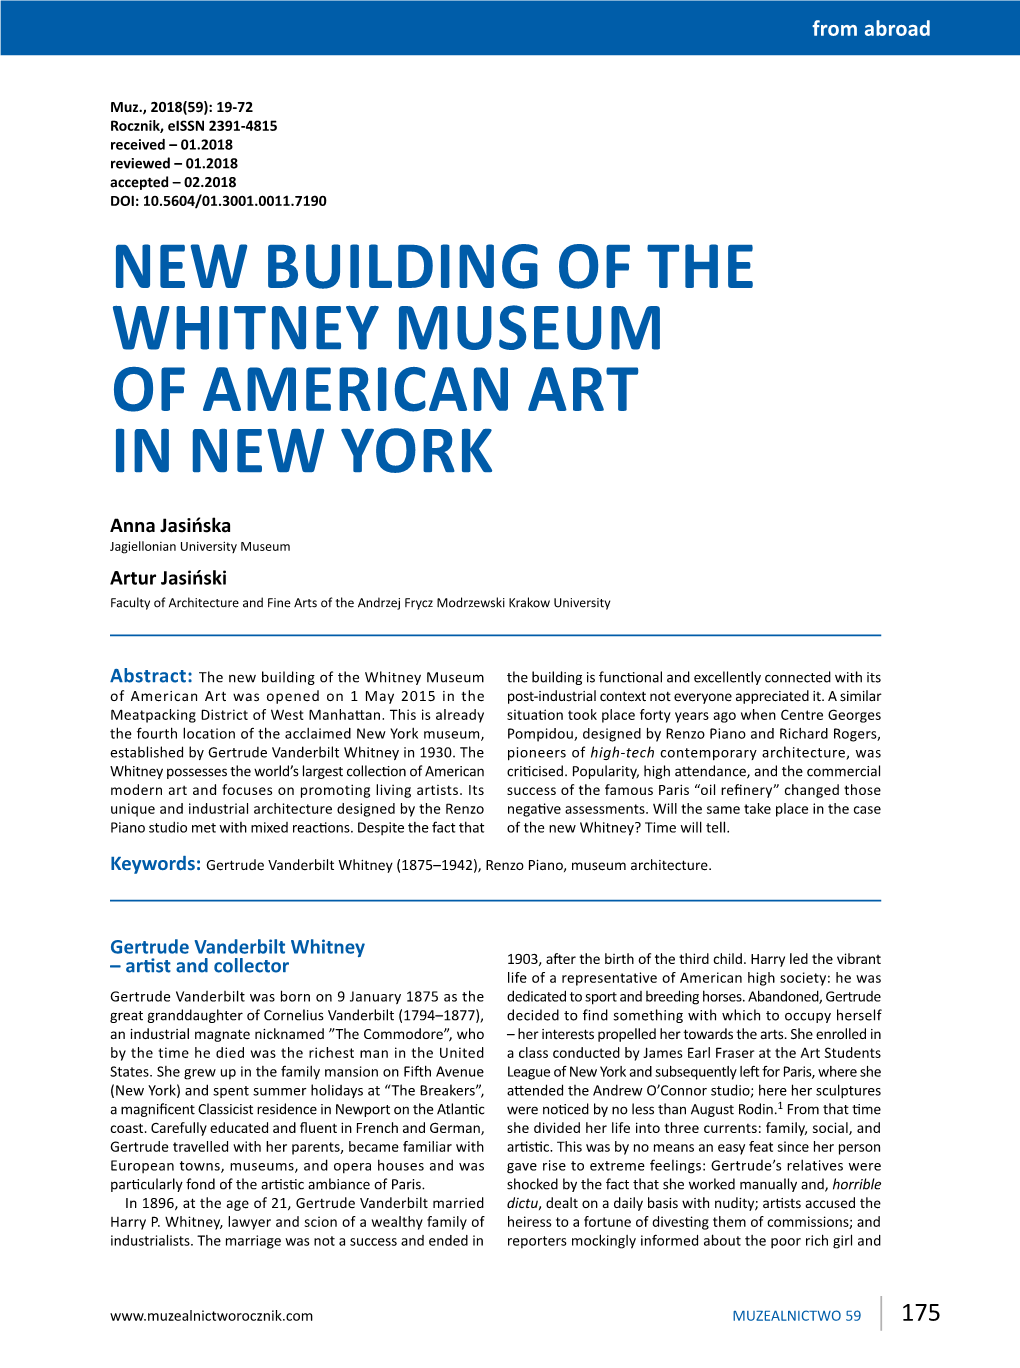 New Building of the Whitney Museum of American Art in New York